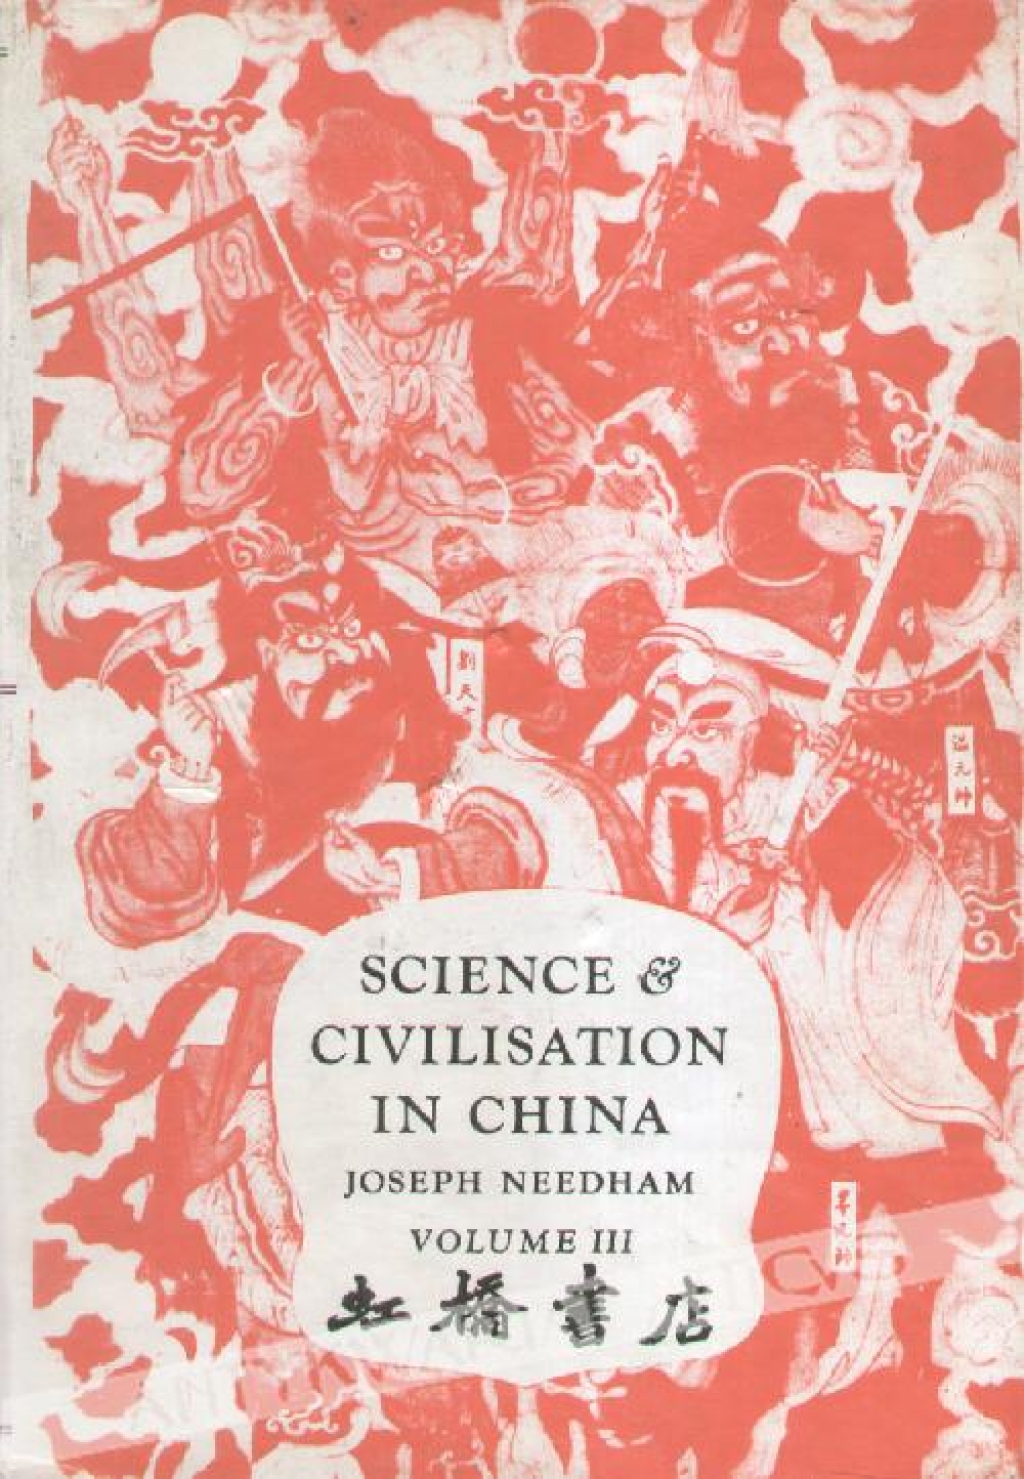 Science & Civilisation in China. Volume III. Mathematics and the Sciences of the Heavens and the Earth